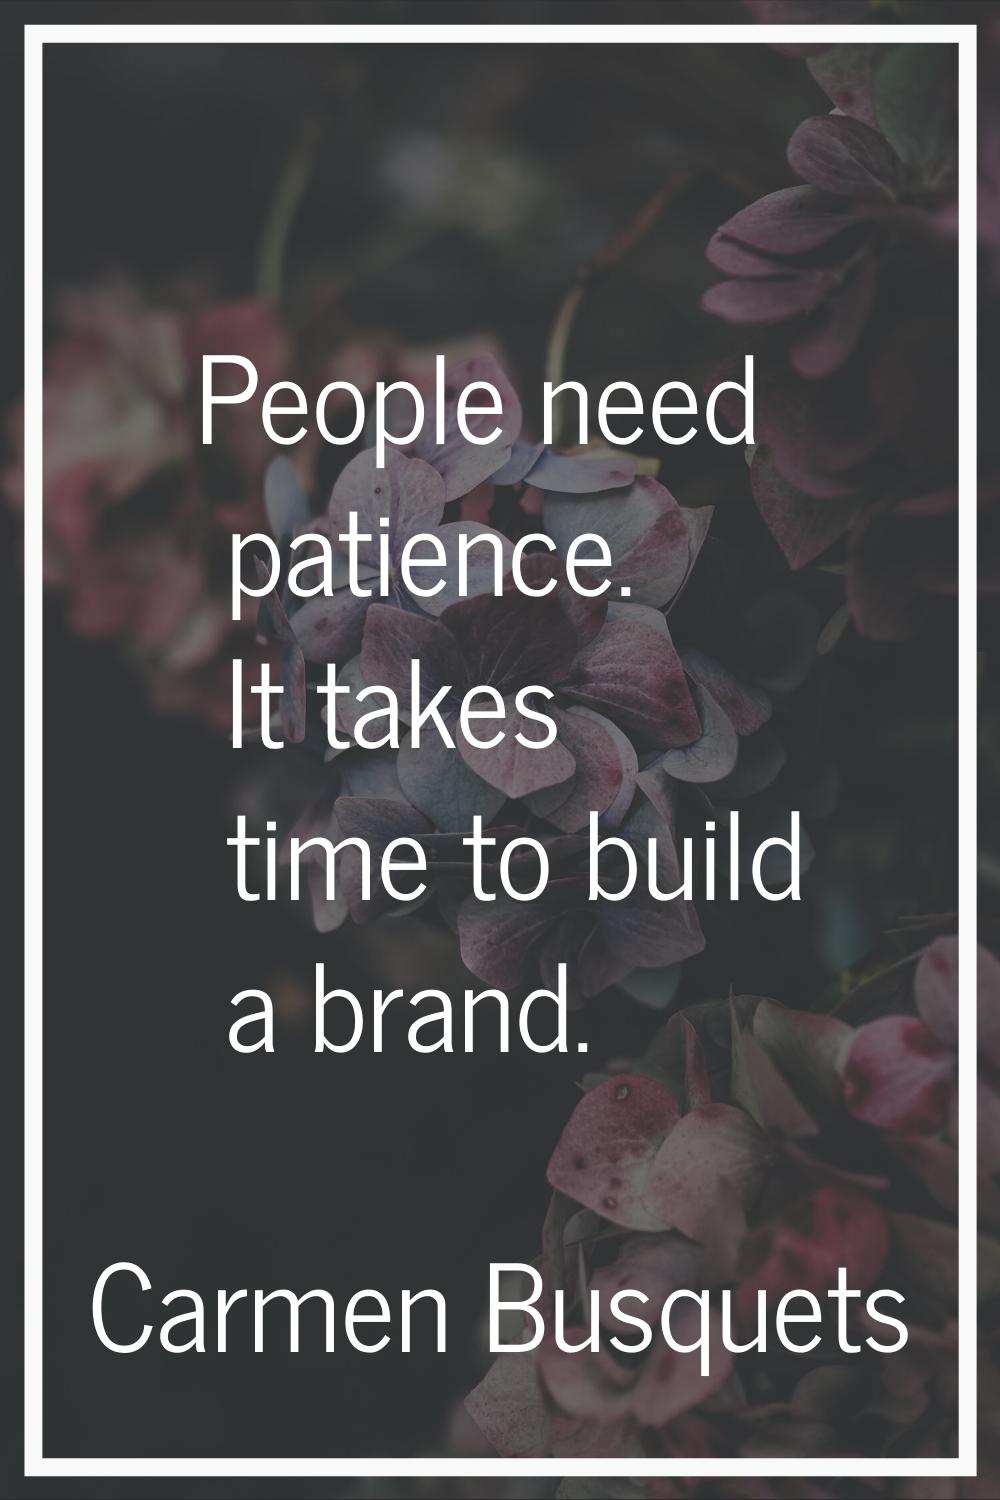 People need patience. It takes time to build a brand.